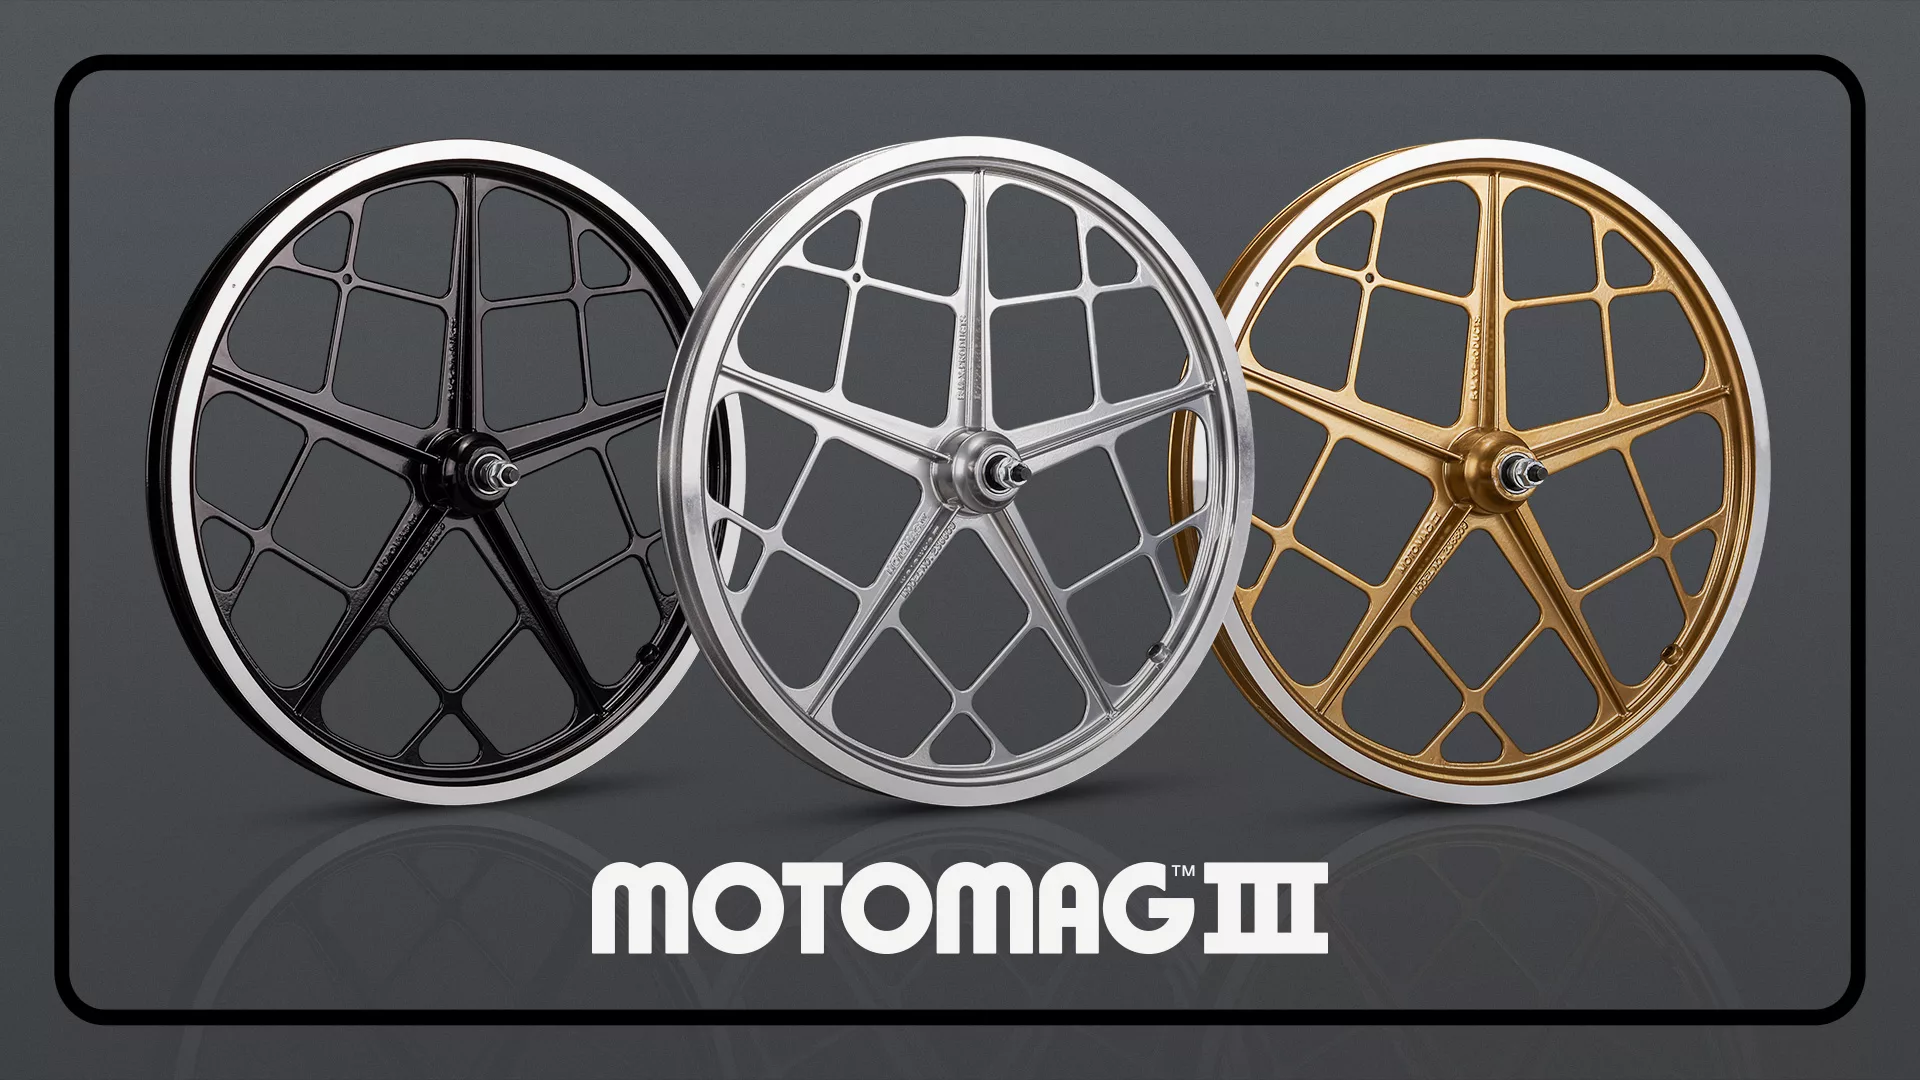 Mongoose resurrects Motomag: The 'Most Iconic Wheelset' in BMX 